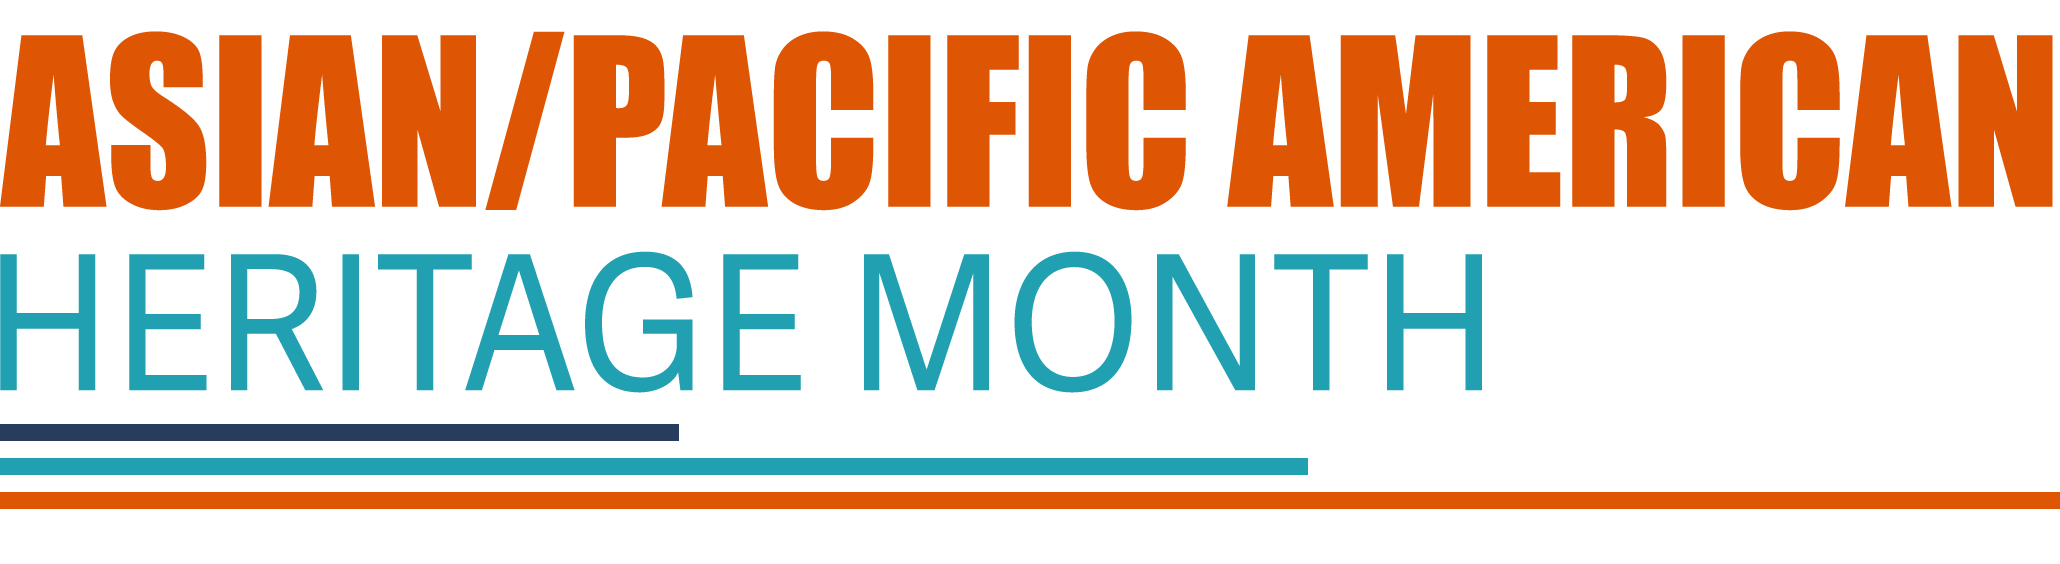 Asian & Pacific American Heritage Month